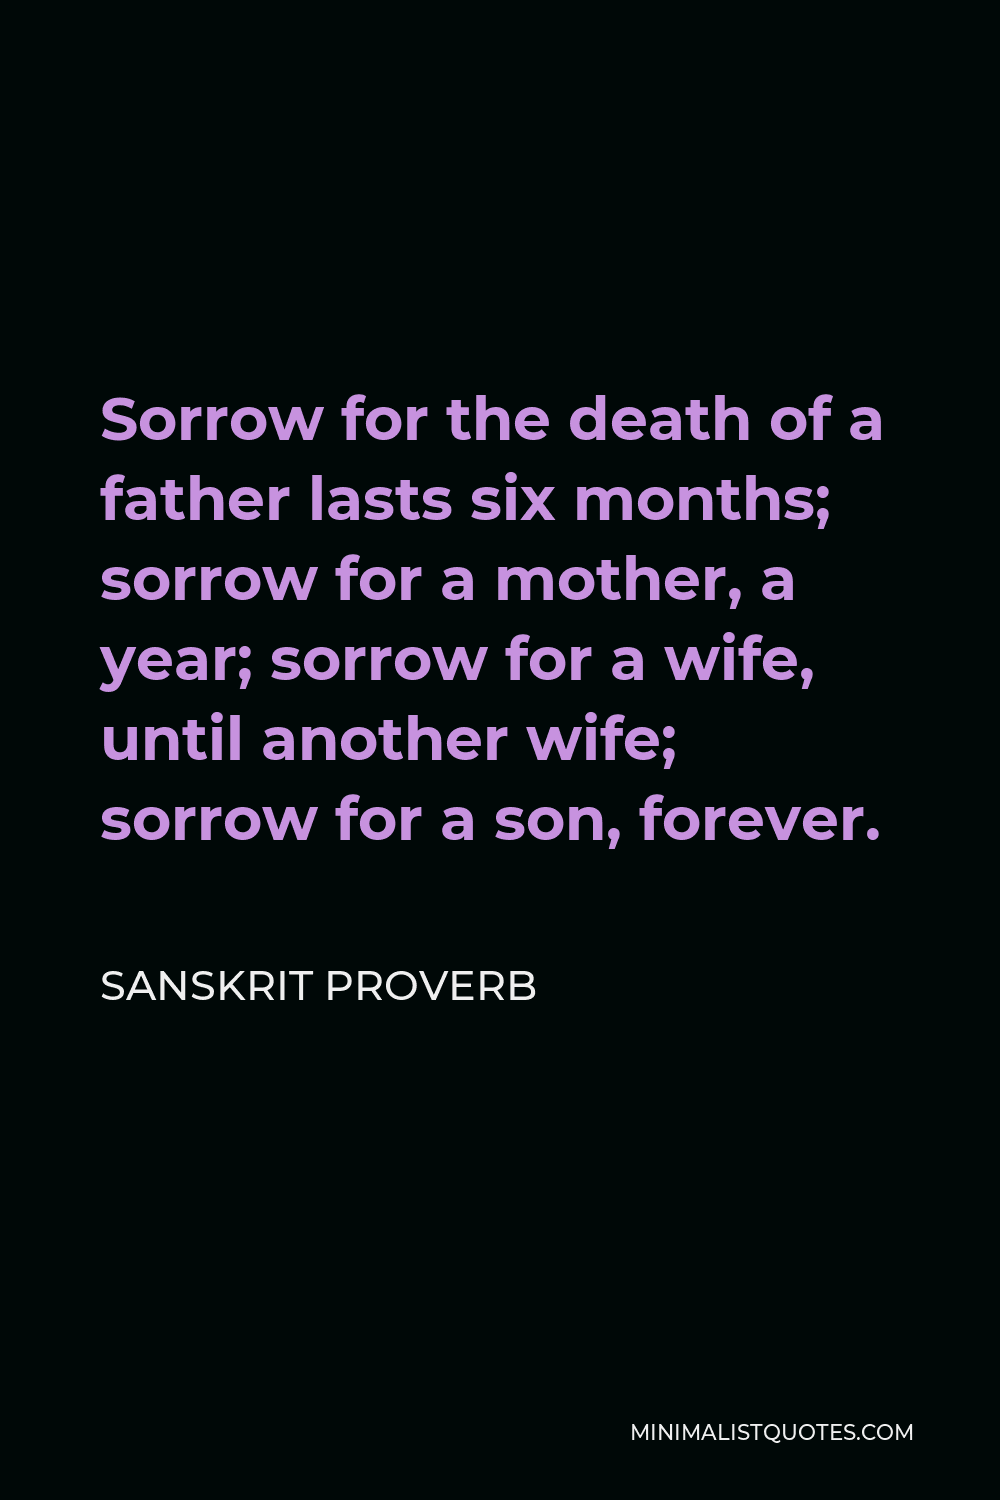 Sanskrit Proverb Quote - Sorrow for the death of a father lasts six months; sorrow for a mother, a year; sorrow for a wife, until another wife; sorrow for a son, forever.